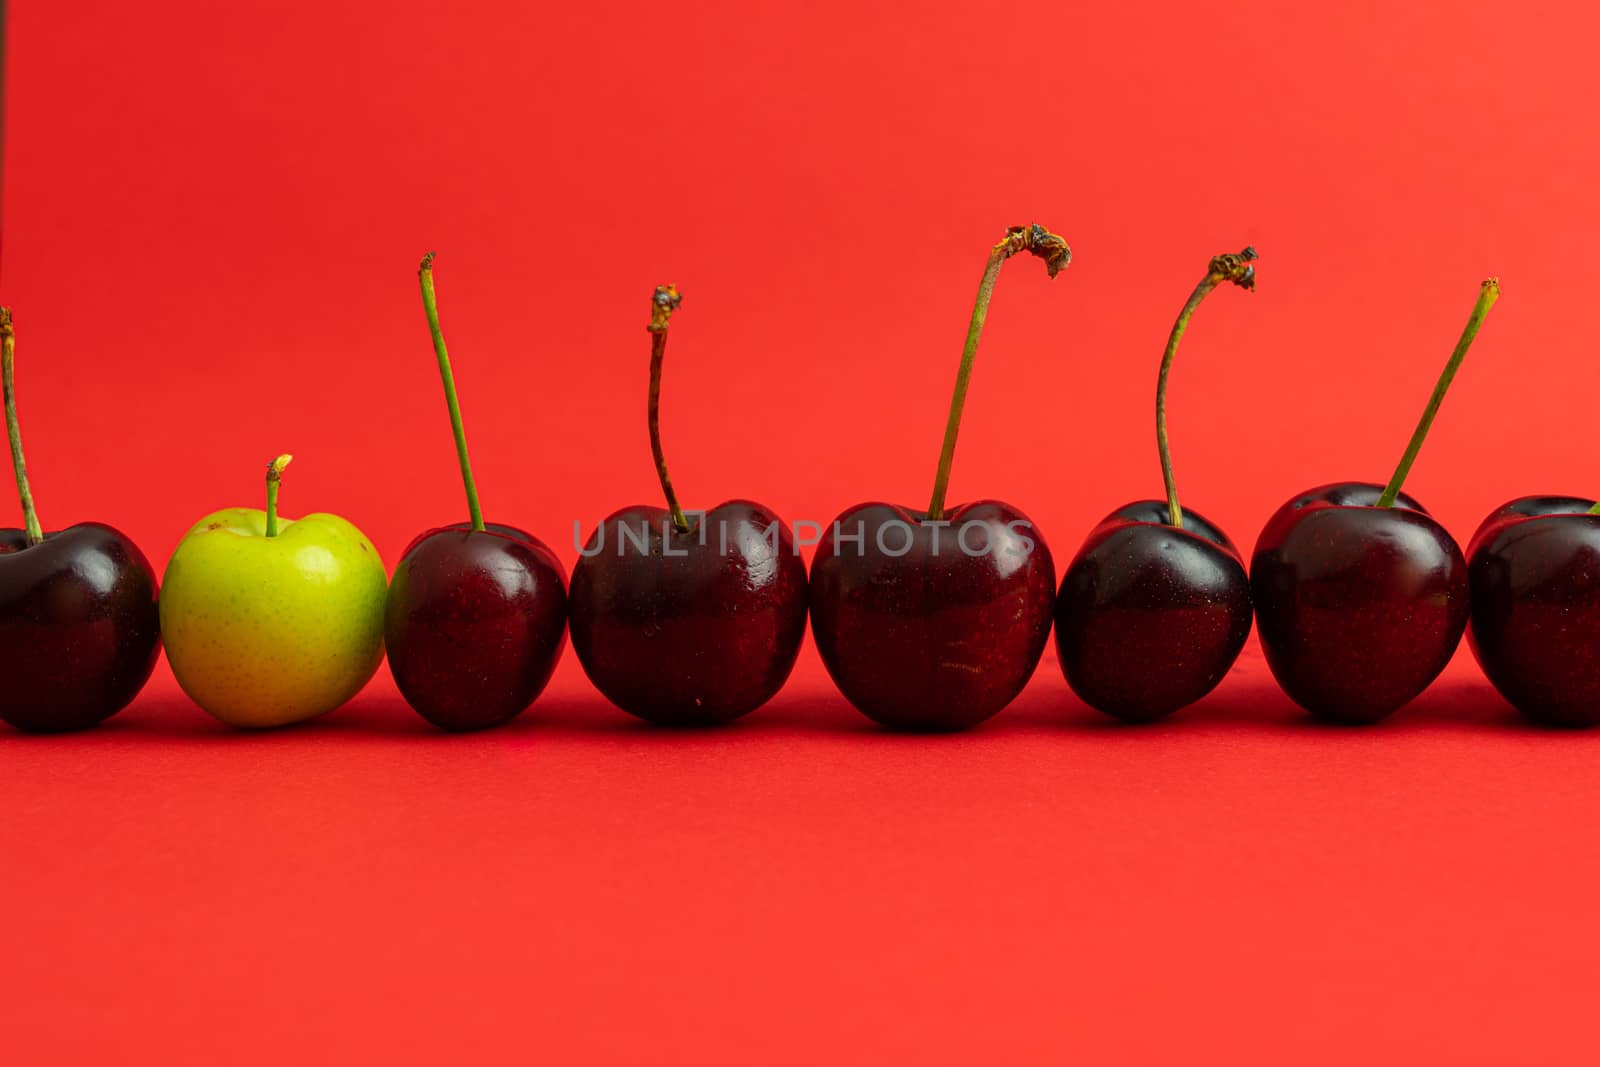 Line of cherries with a green plum on the left by Dumblinfilms